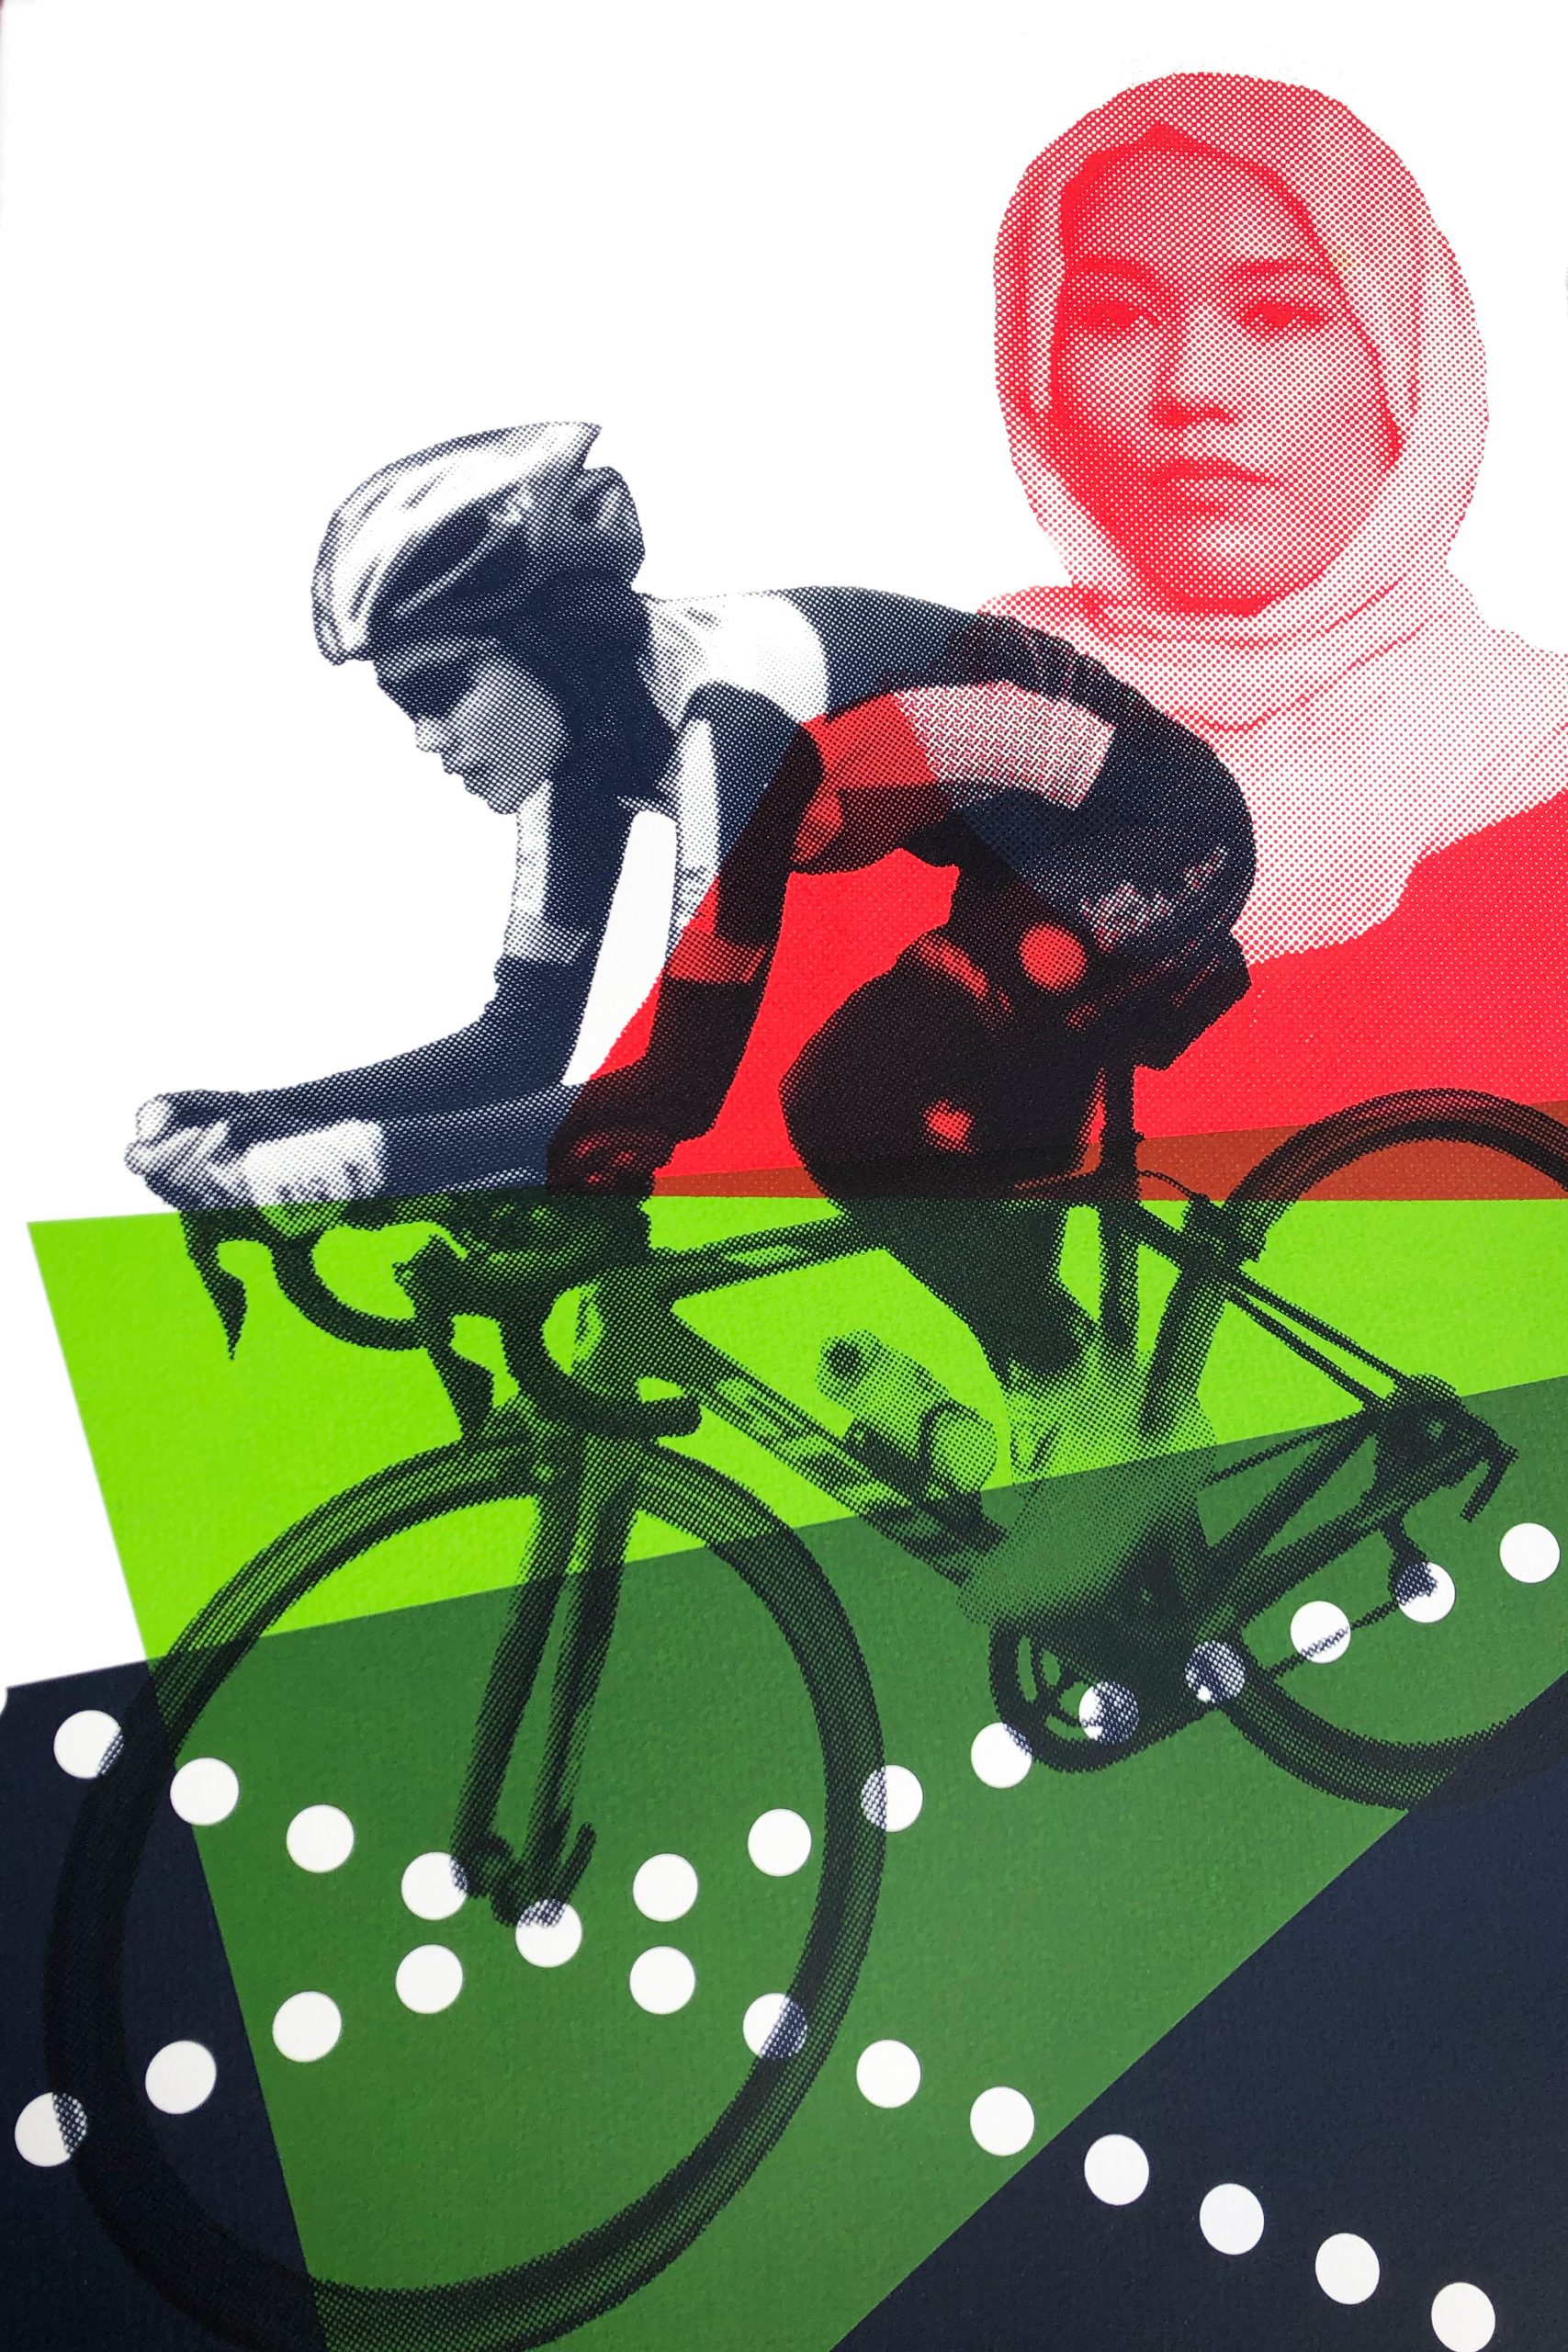 Poster image showing Masomah Alizada a female Afghan cyclist who took part in, the 2020 Olympic Games as part of the International Olympic Committee (IOC) Refugee Olympic Team